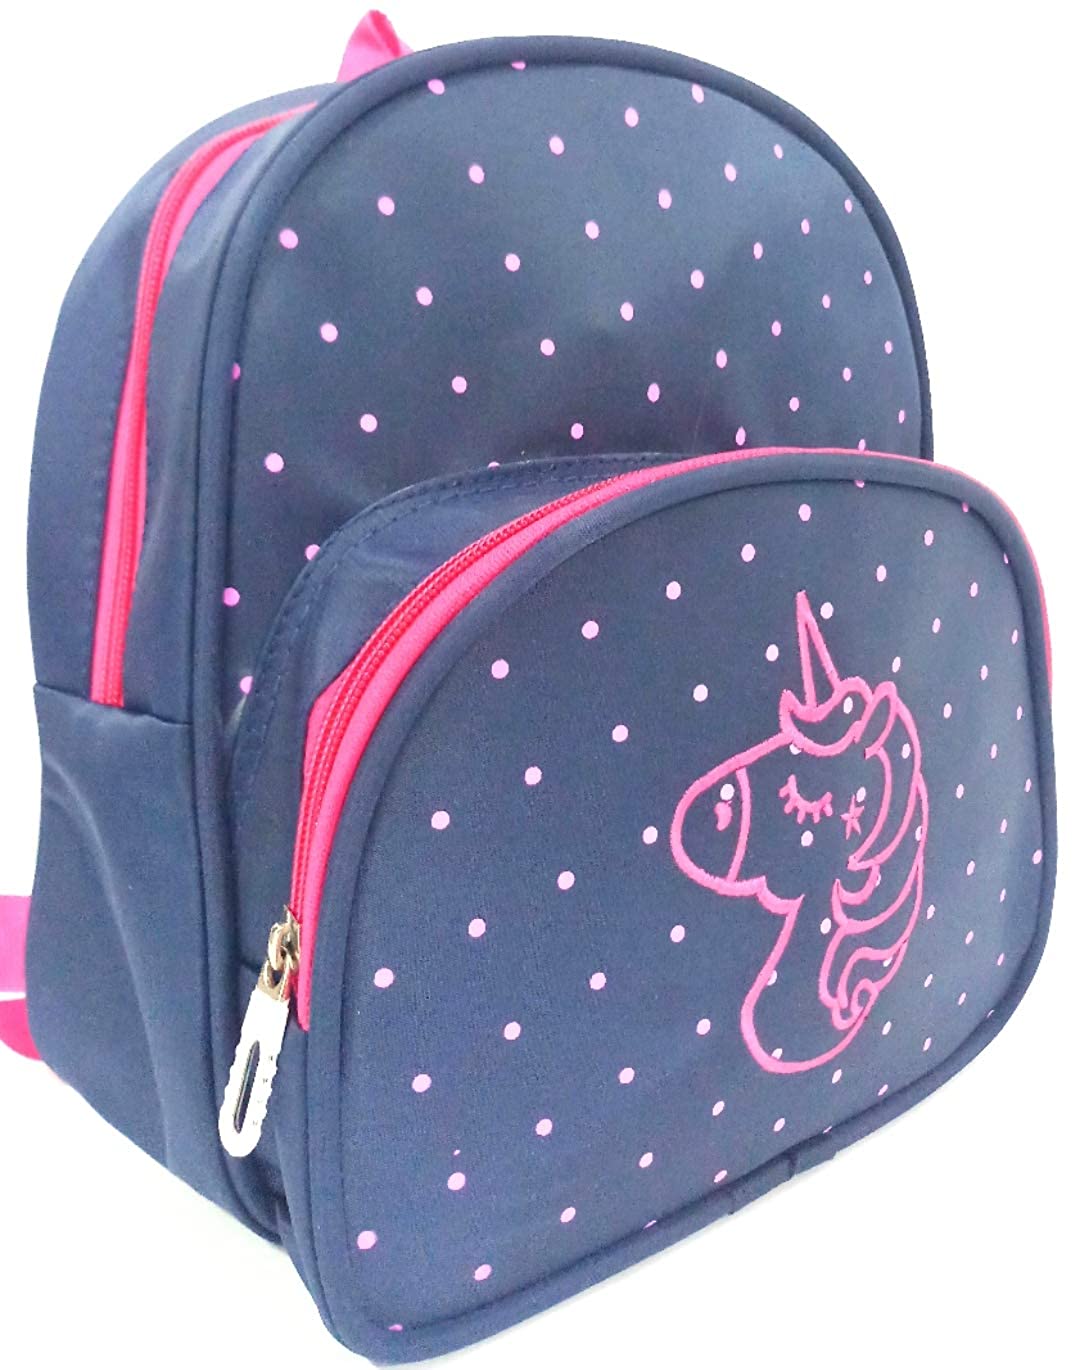 Purple Unicorn bag | Buy Latest Premium Collections Up to 70% Off